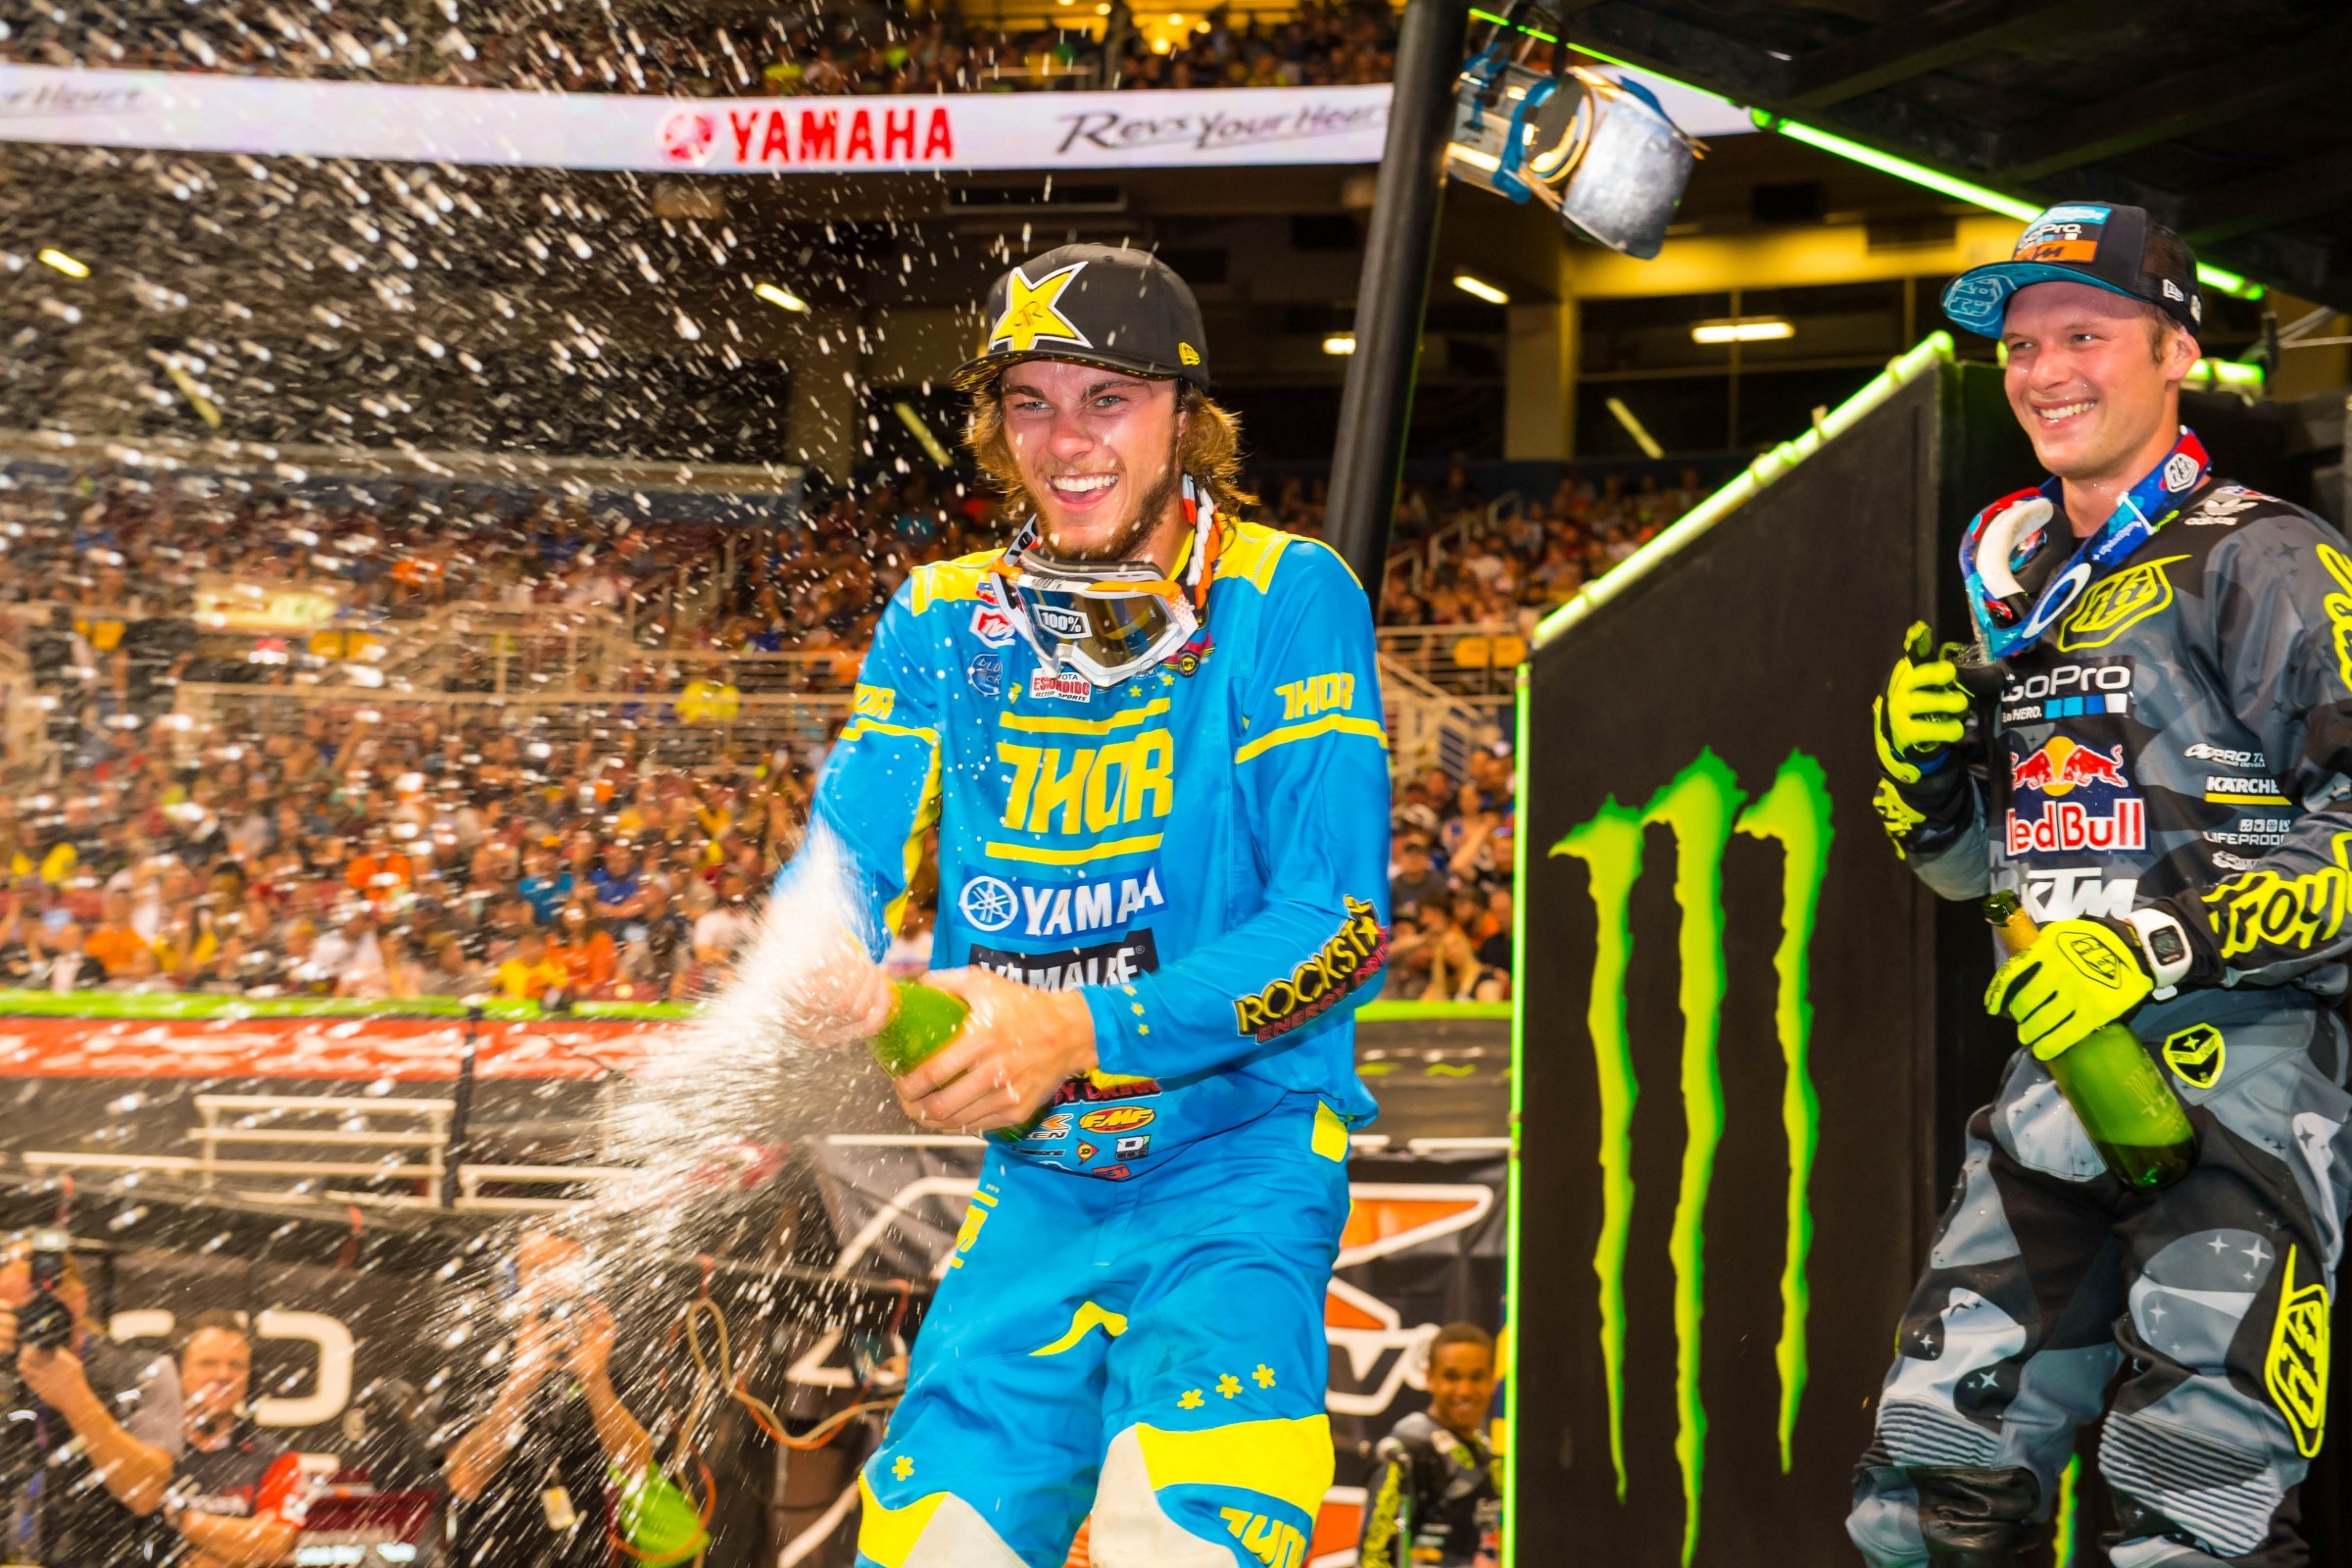 10 Things to Watch New Jersey Supercross Racer X